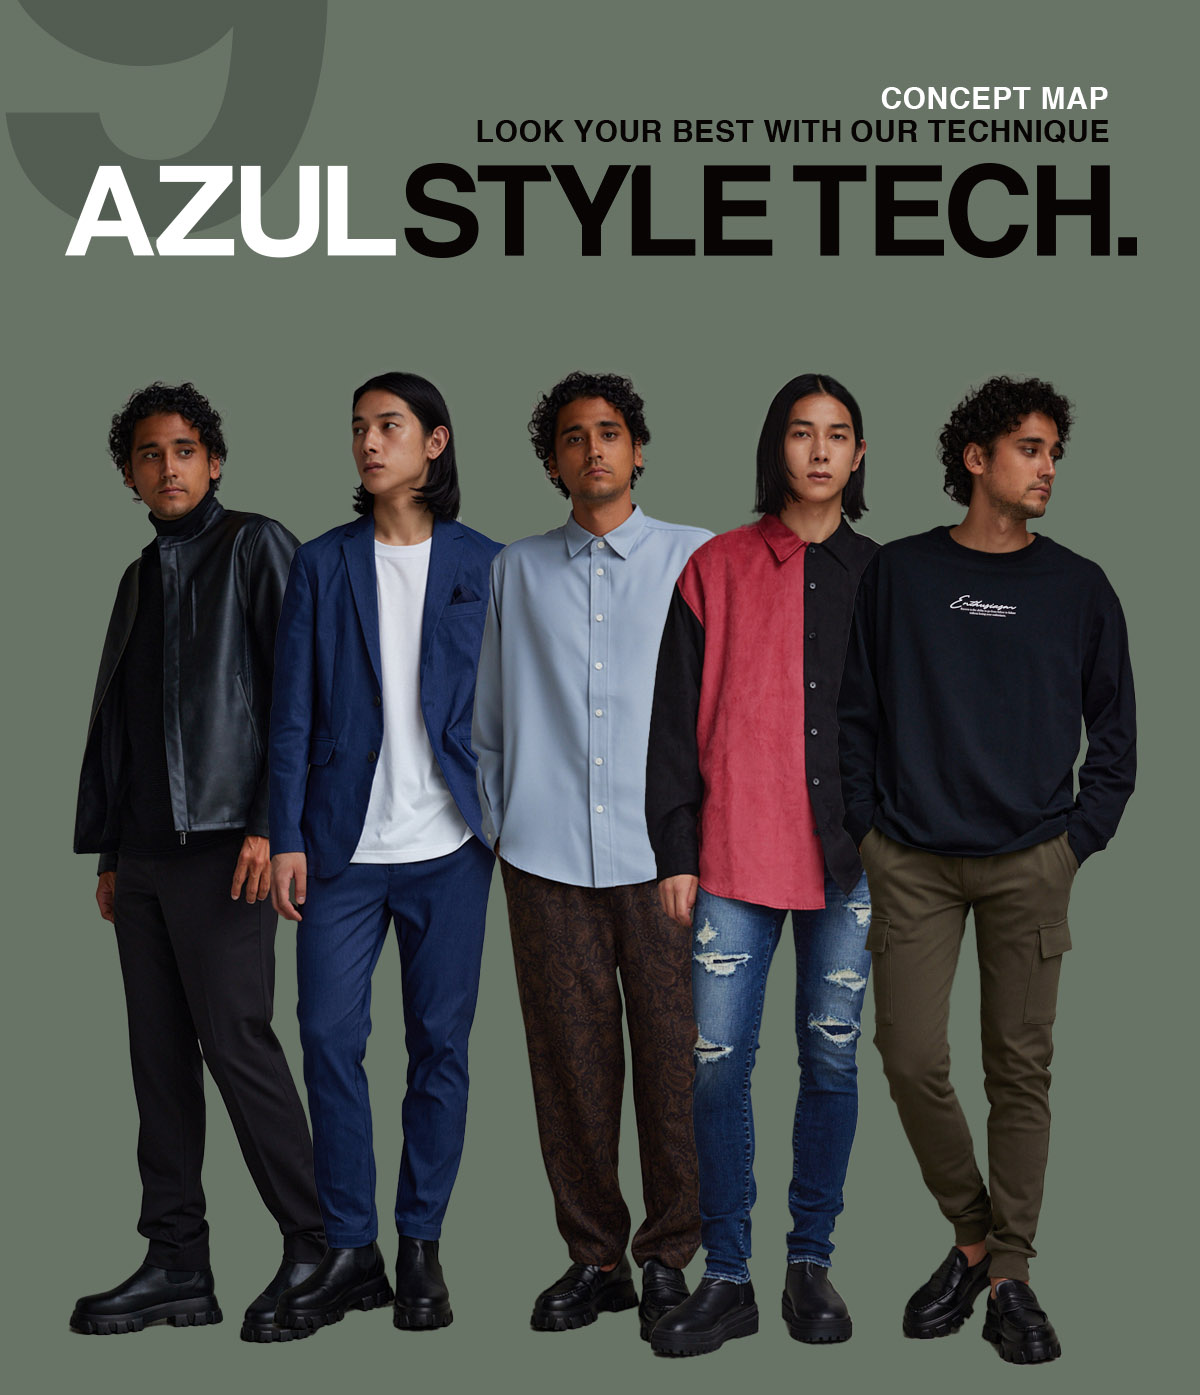 LOOK YOUR BEST WITH OUR TECHNIQUE AZUL STYLE TECH. 9 for MEN